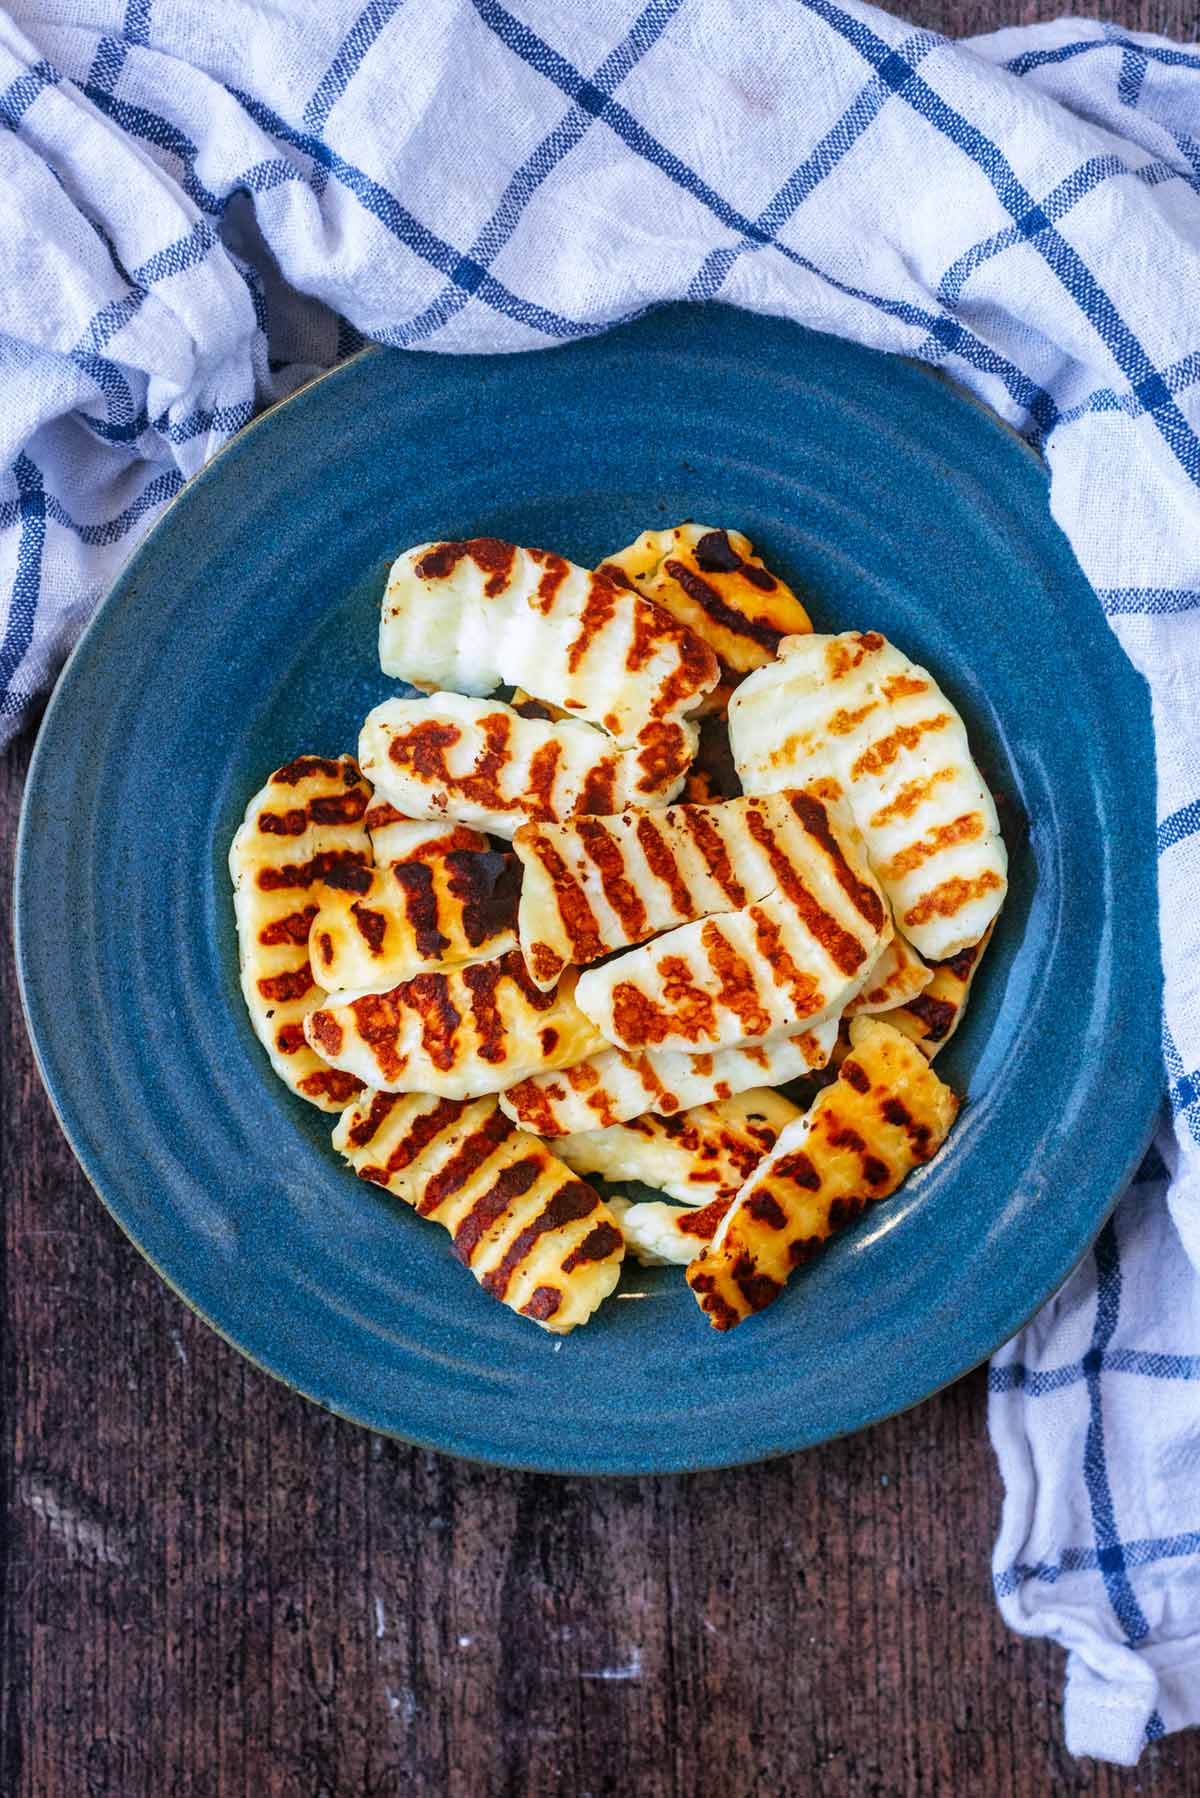 Slices of cooked halloumi with scorch marks across them.